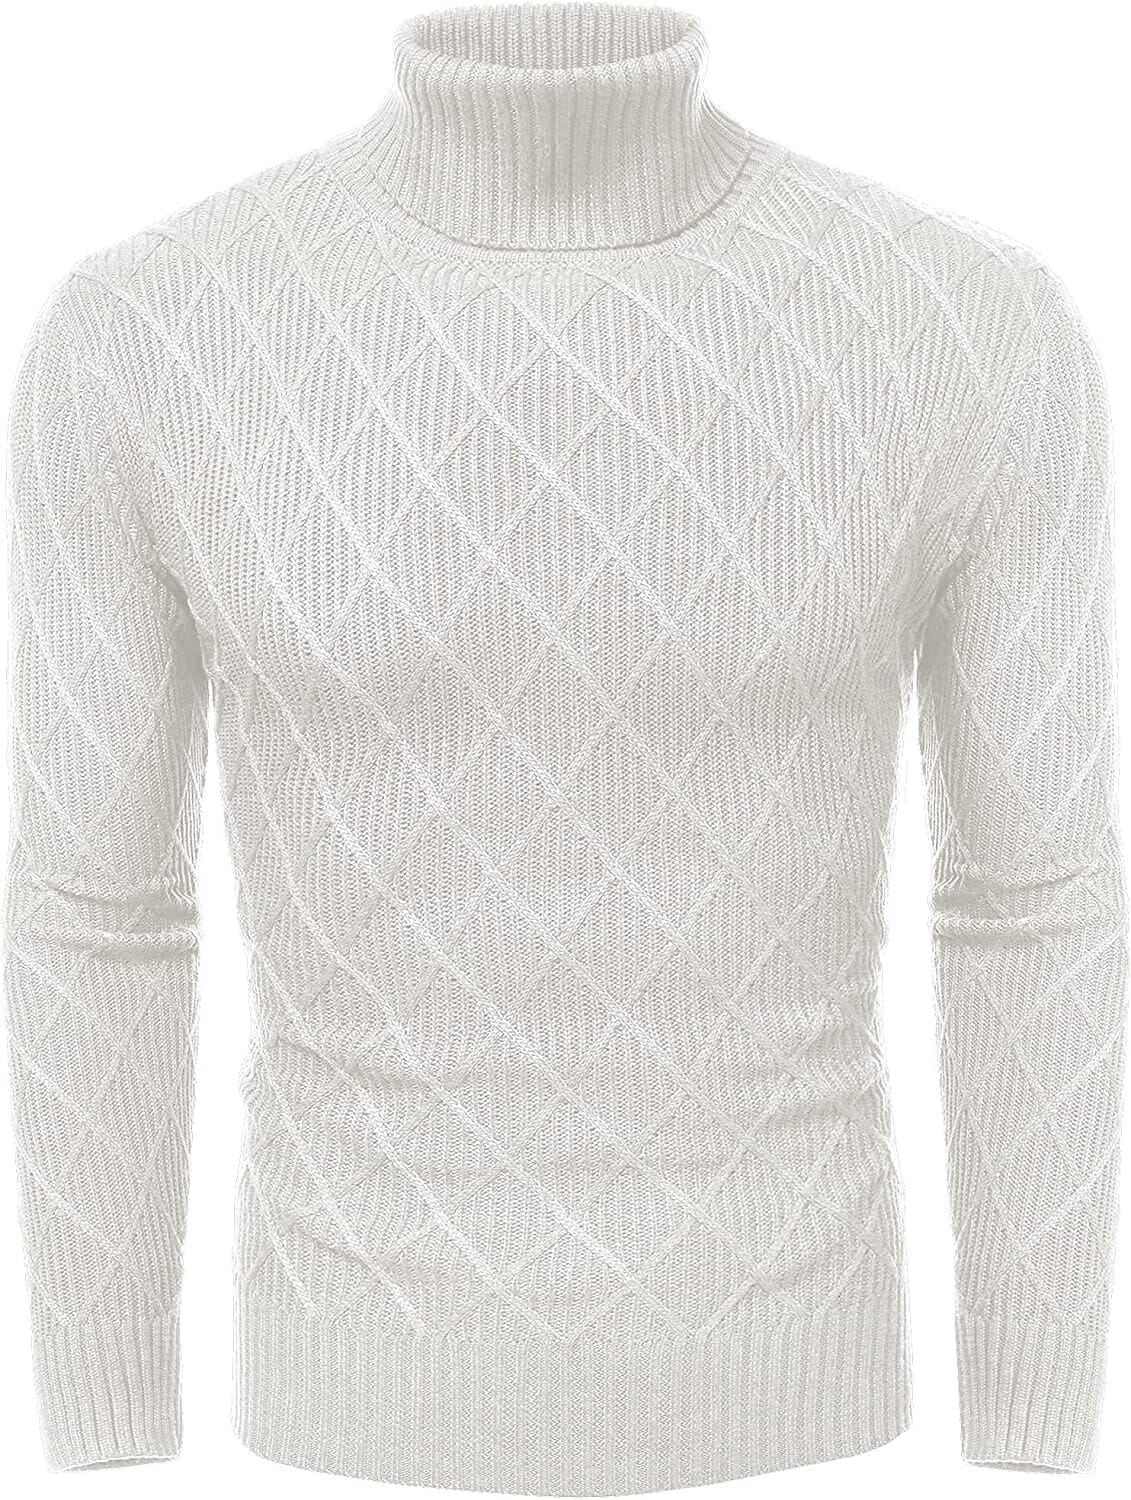 Slim Fit Thick Cotton Pullover Turtleneck Sweaters (US Only) Sweaters COOFANDY Store White S 